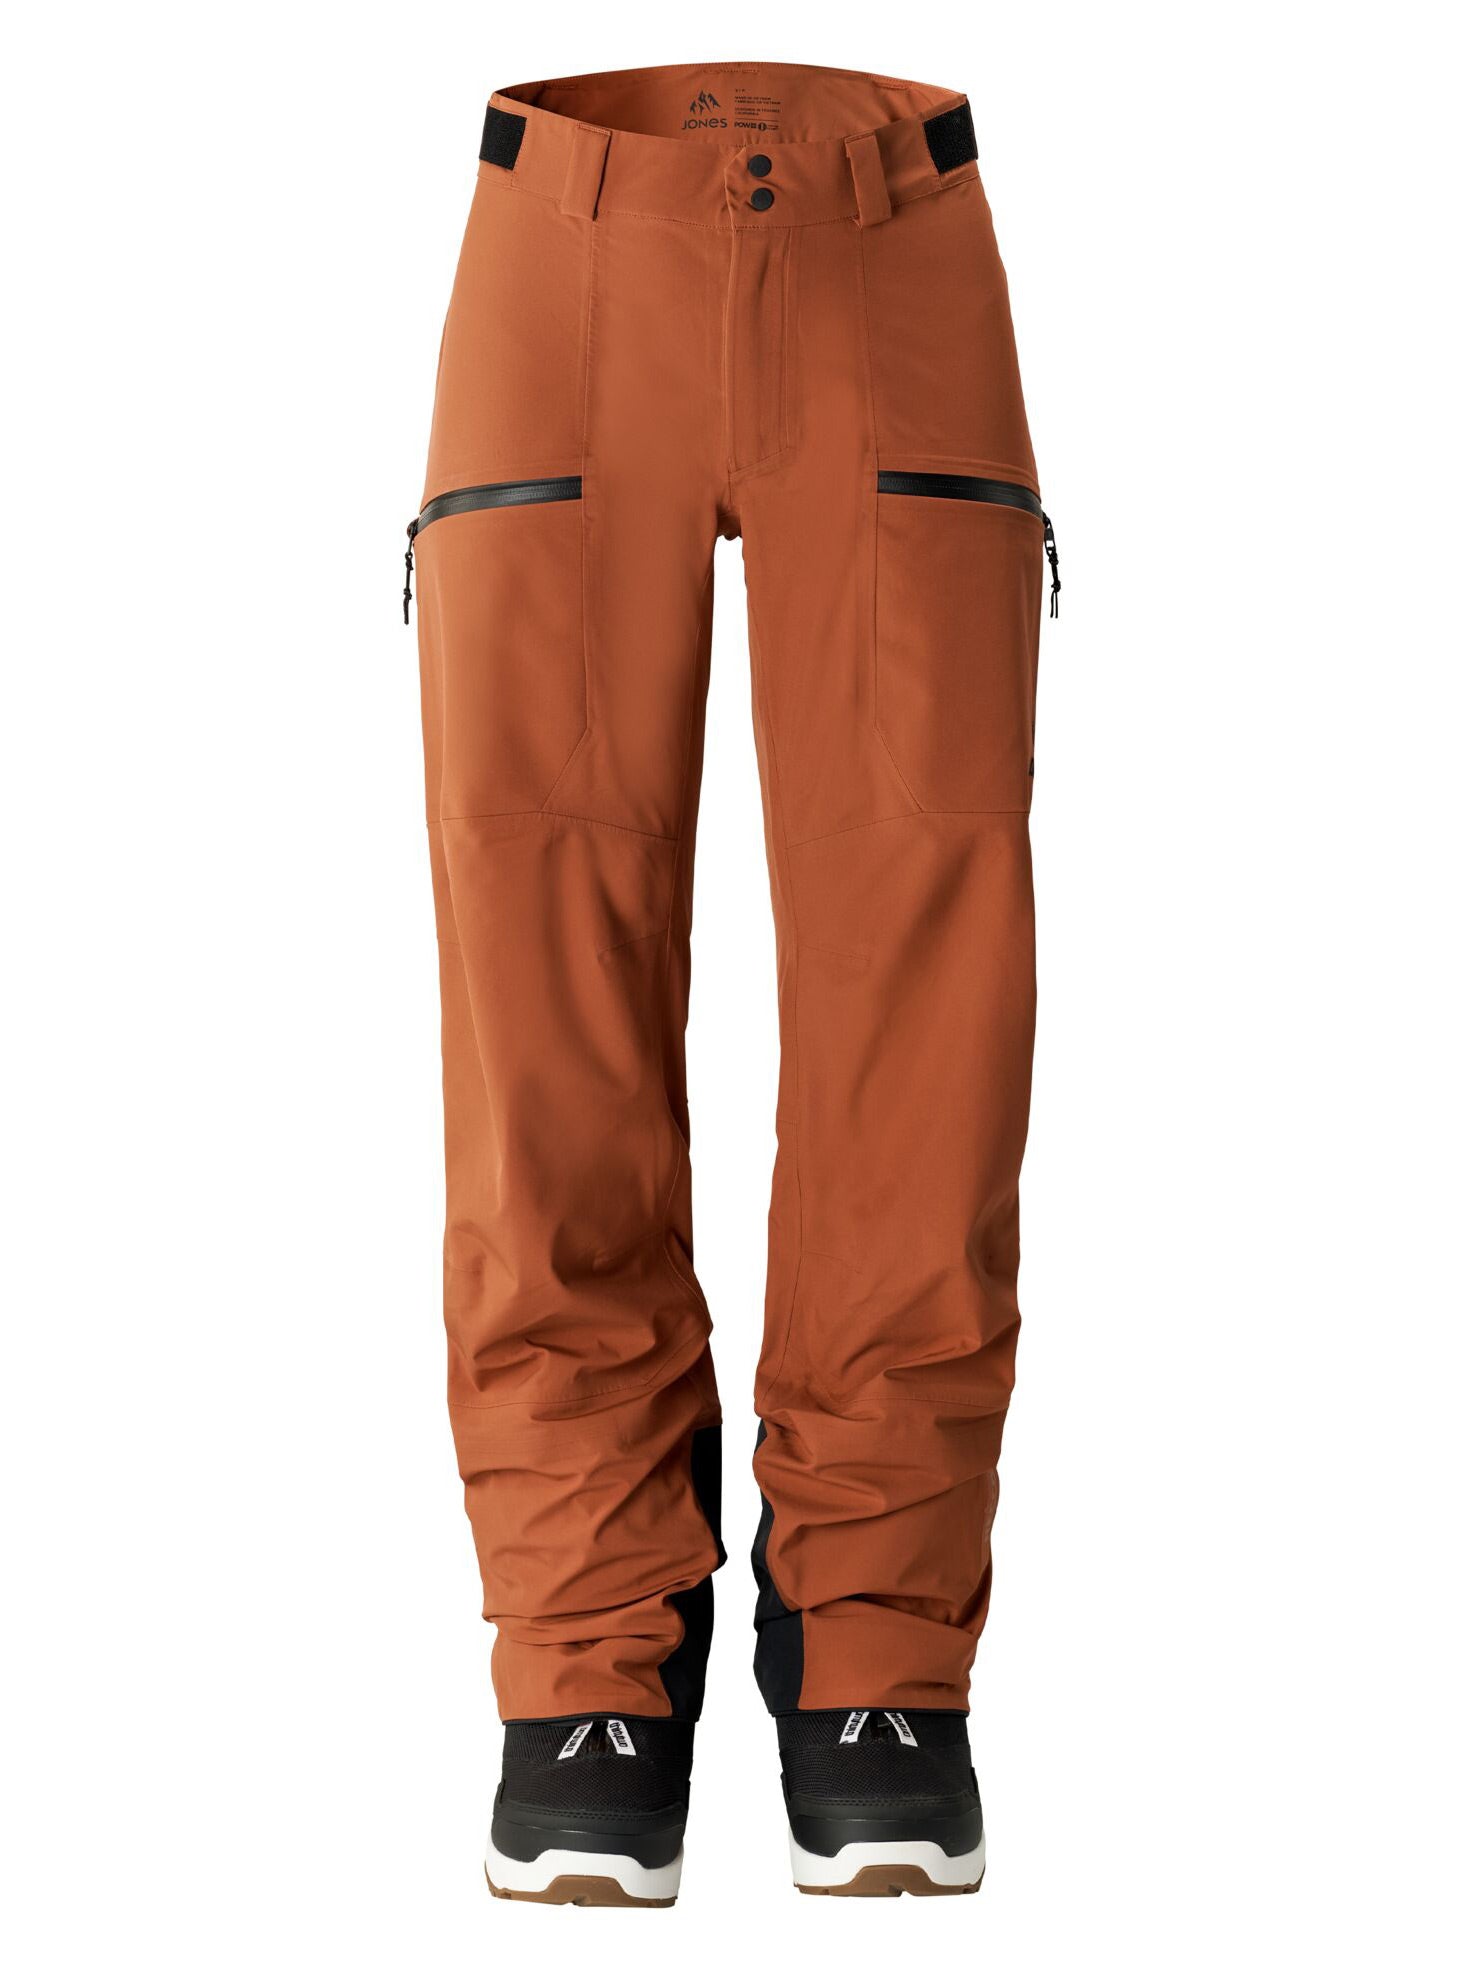 Women's Shralpinist Recycled Pant